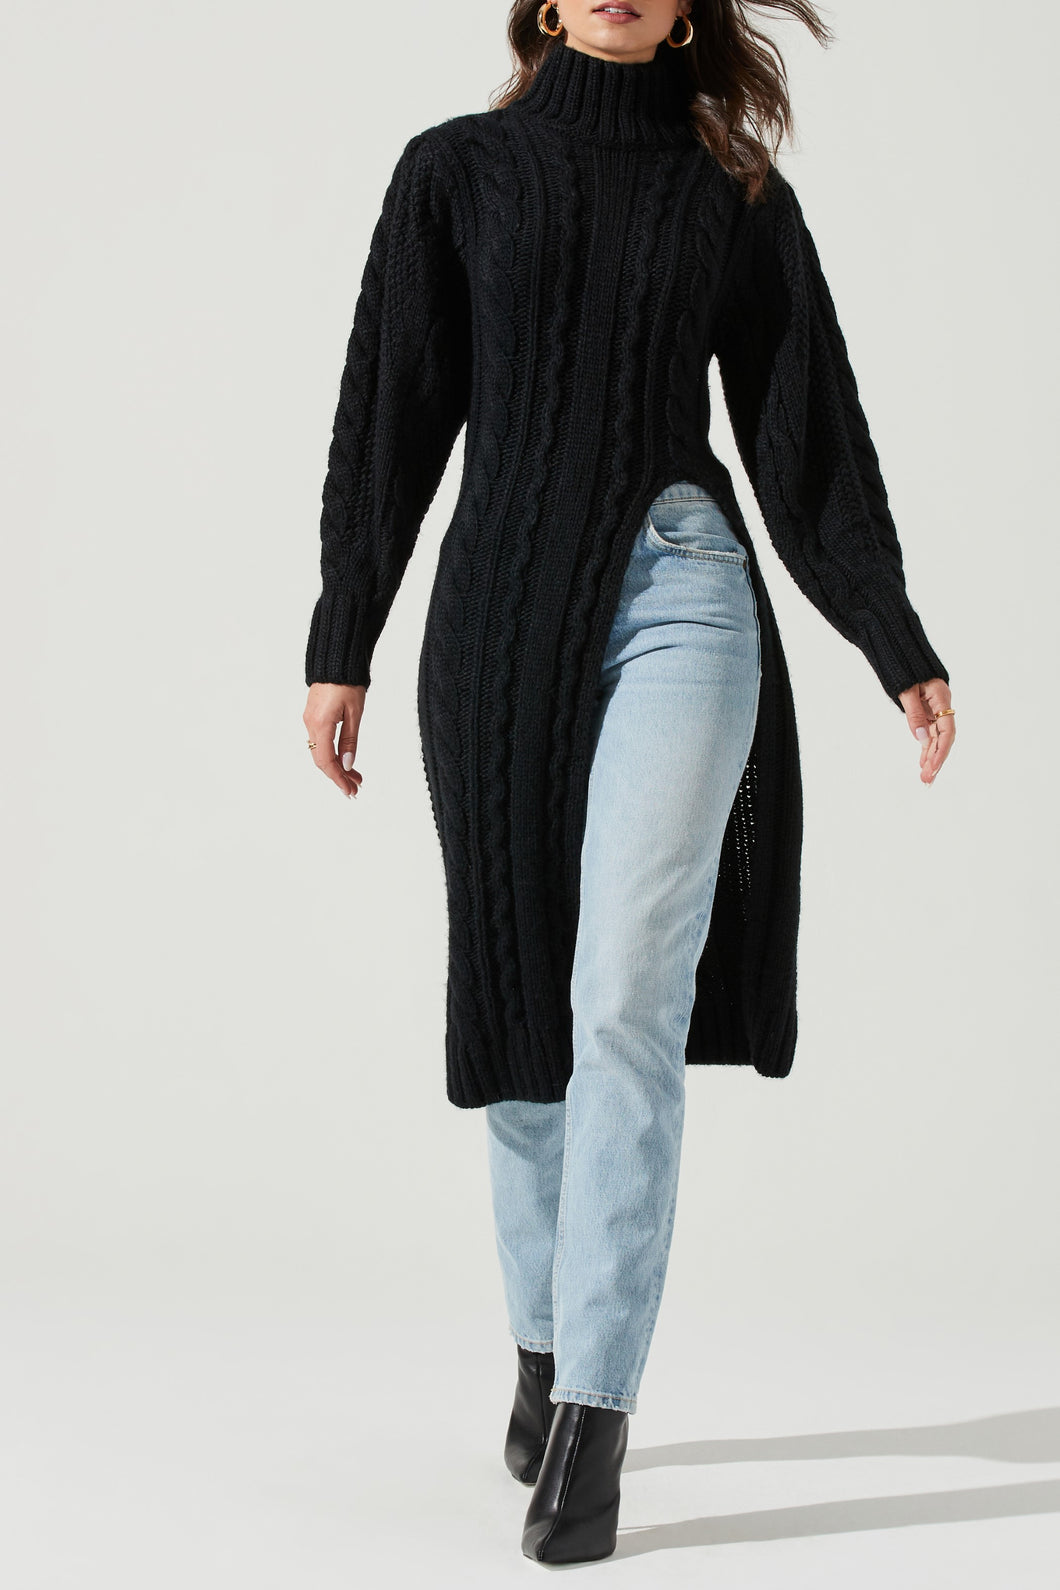 ASTR The Label Evangelina Cable Knit Sweater